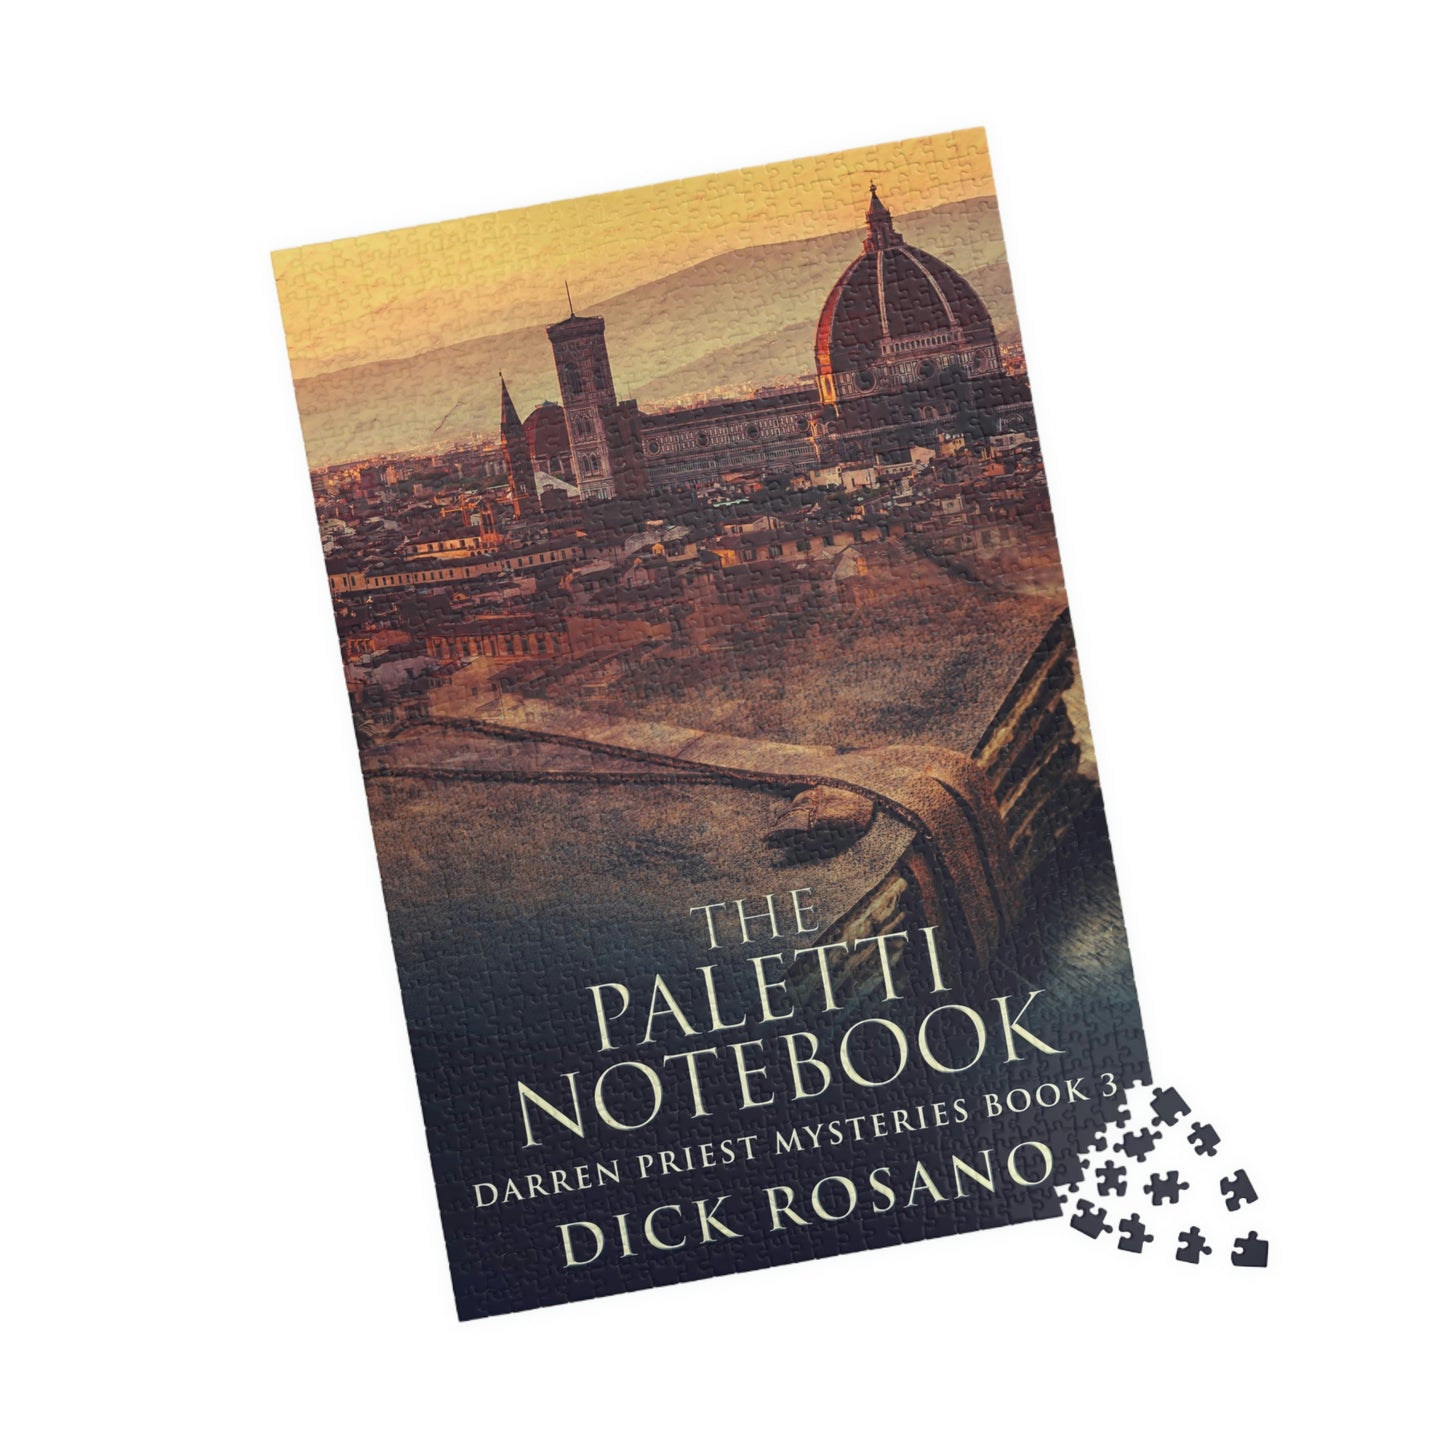 The Paletti Notebook - 1000 Piece Jigsaw Puzzle